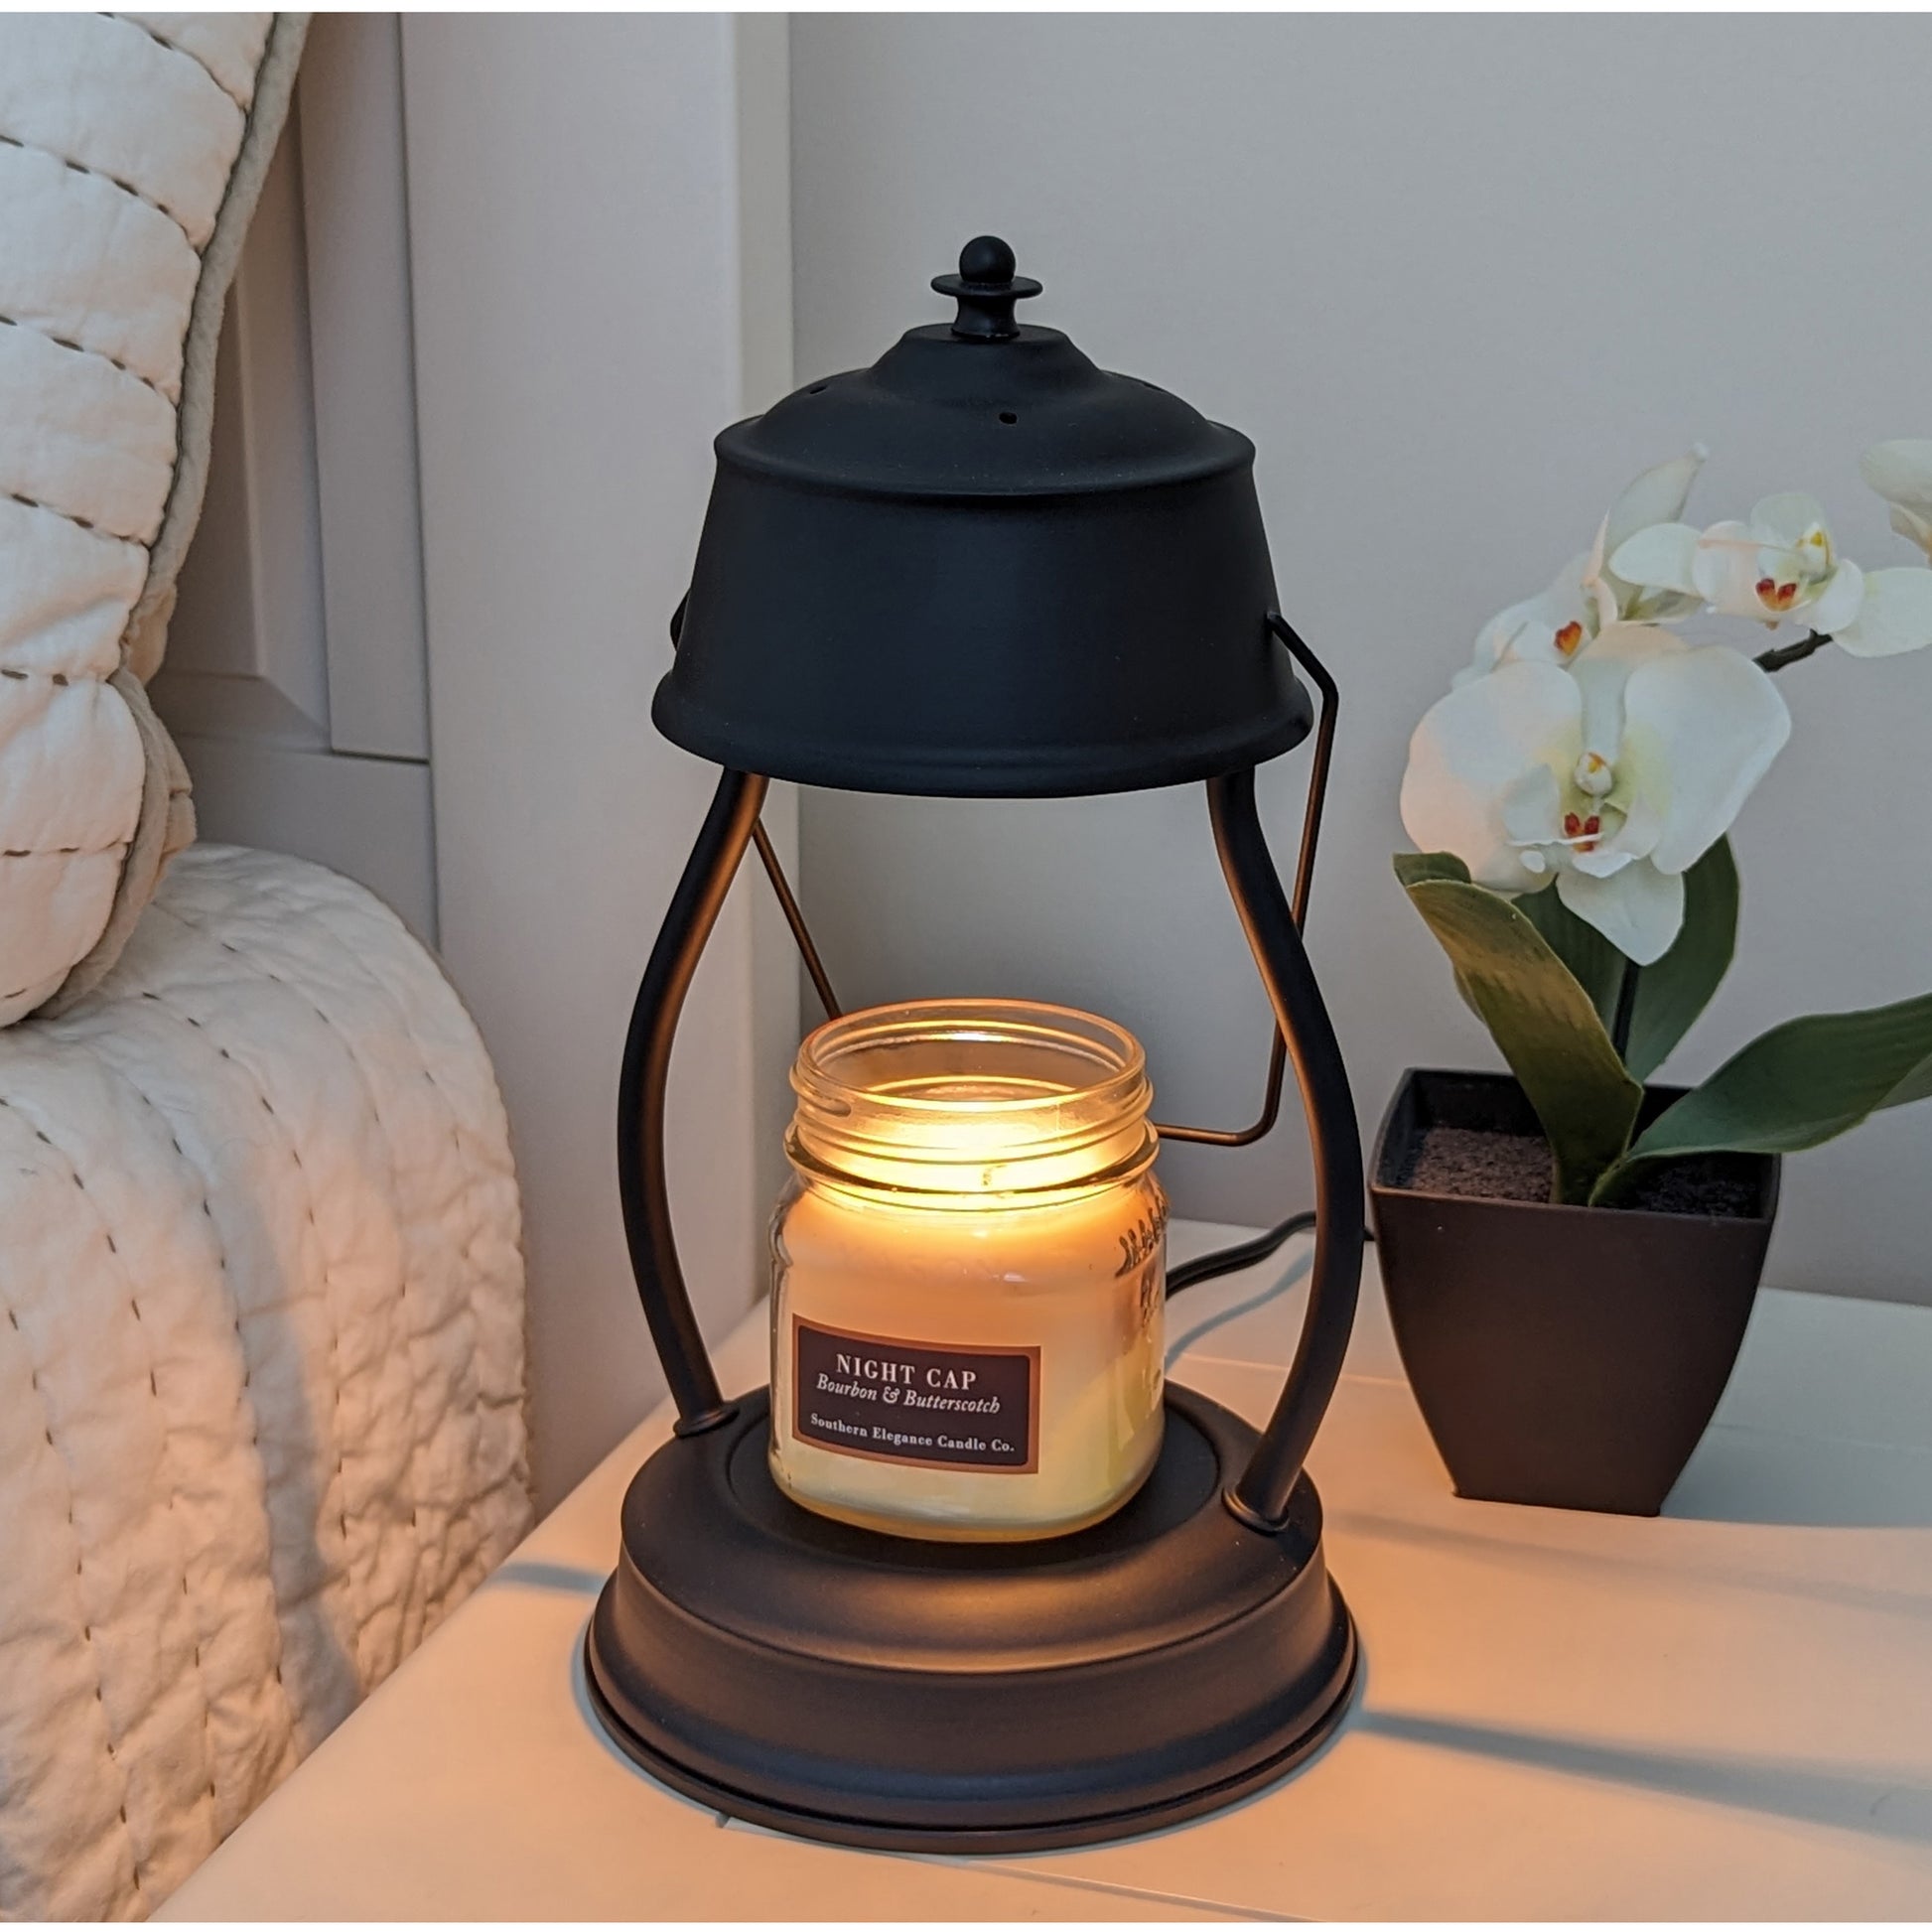 Image, lighted black candle warmer on a bedside table with small scented candle.